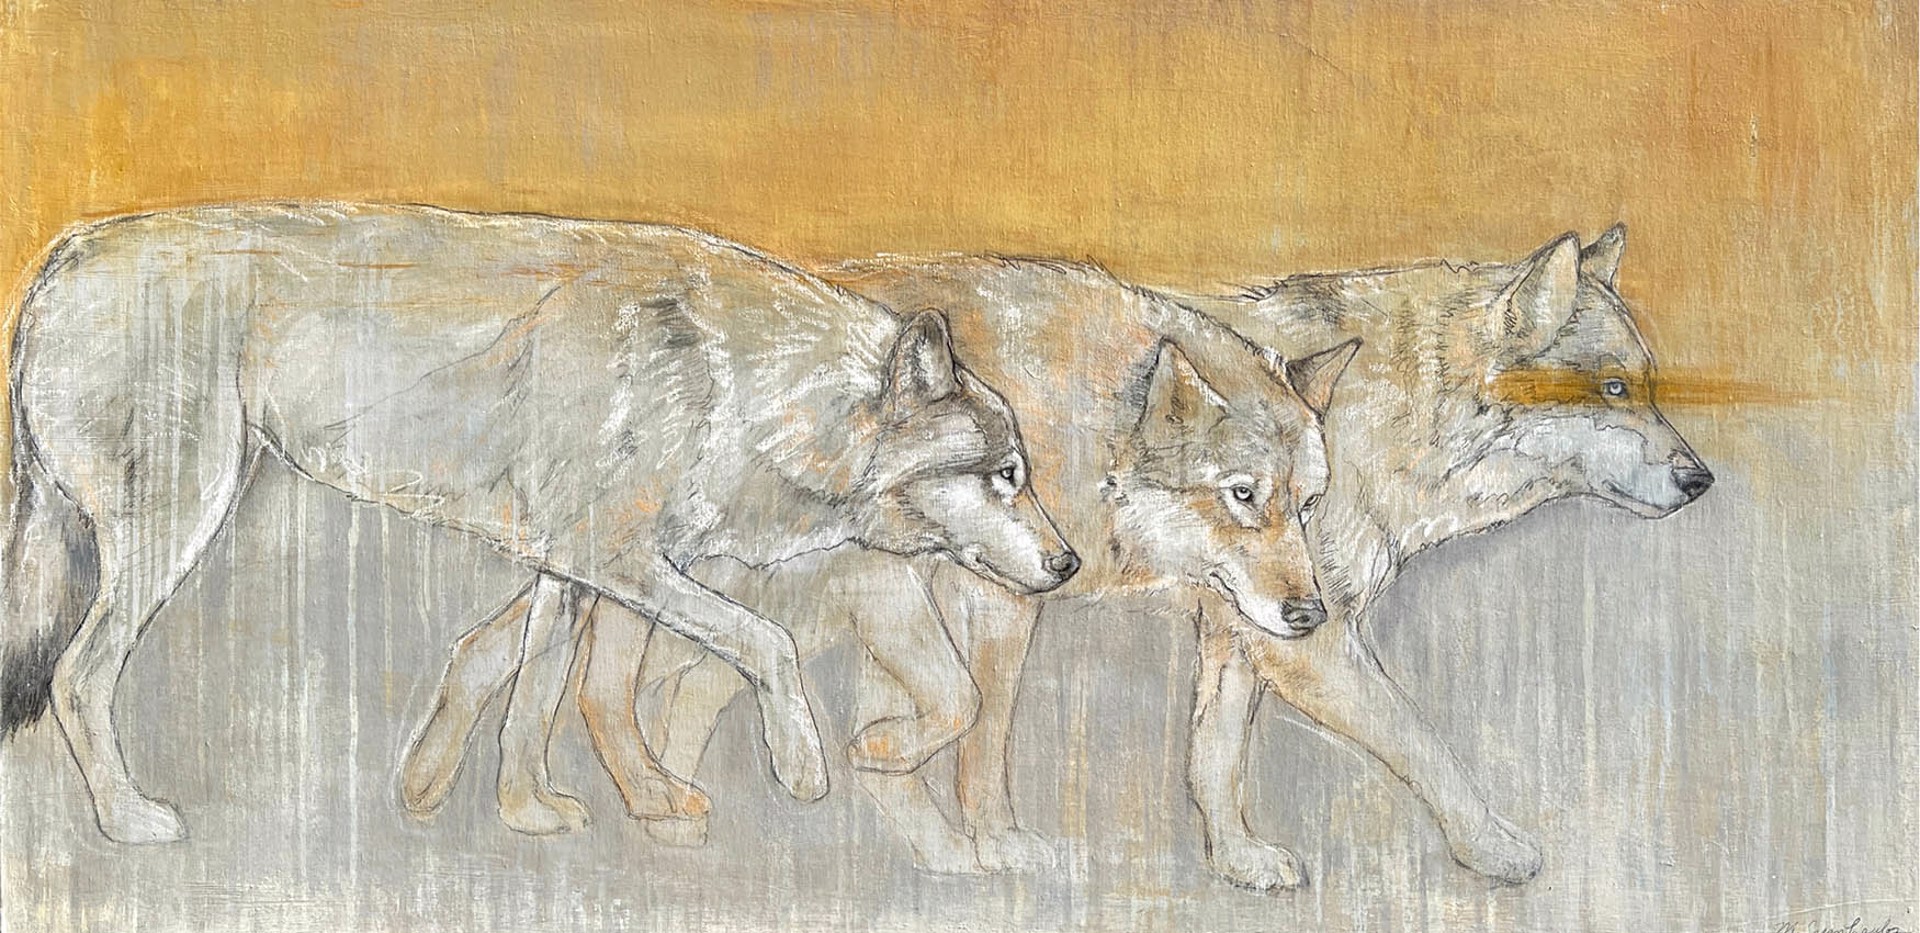 Original Mixed Media Artwork Featuring Three Walking Wolves Sketched On Top Of Colorblock Abstract Yellow And Grey Background